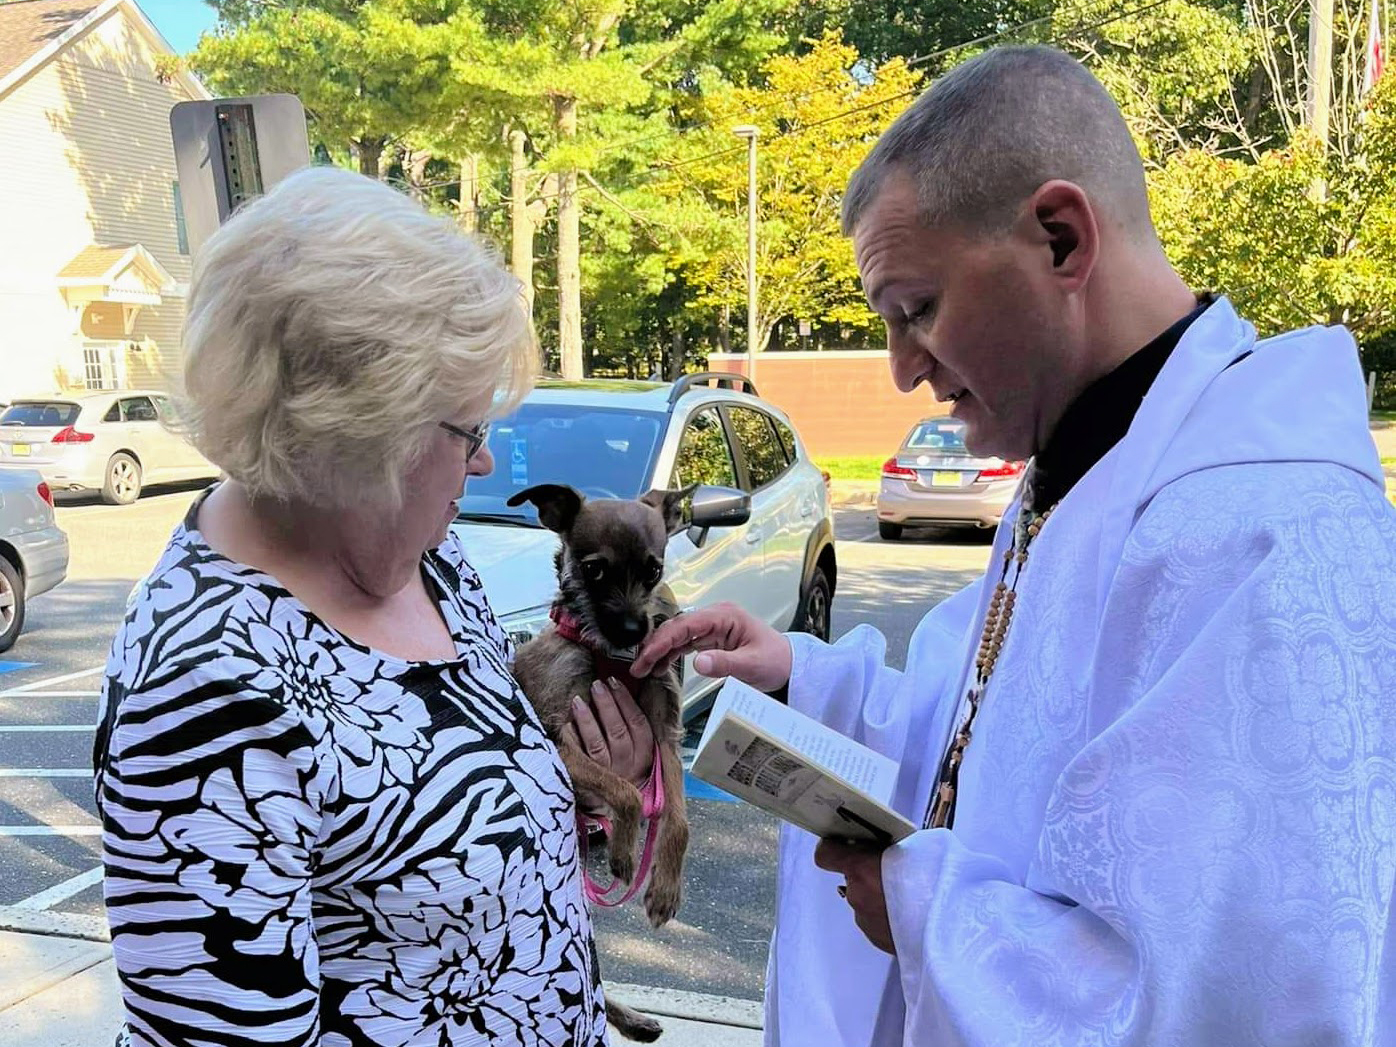 Chaplain Matty Giuliano speaks with a dog and its owner. (Courtesy photo)